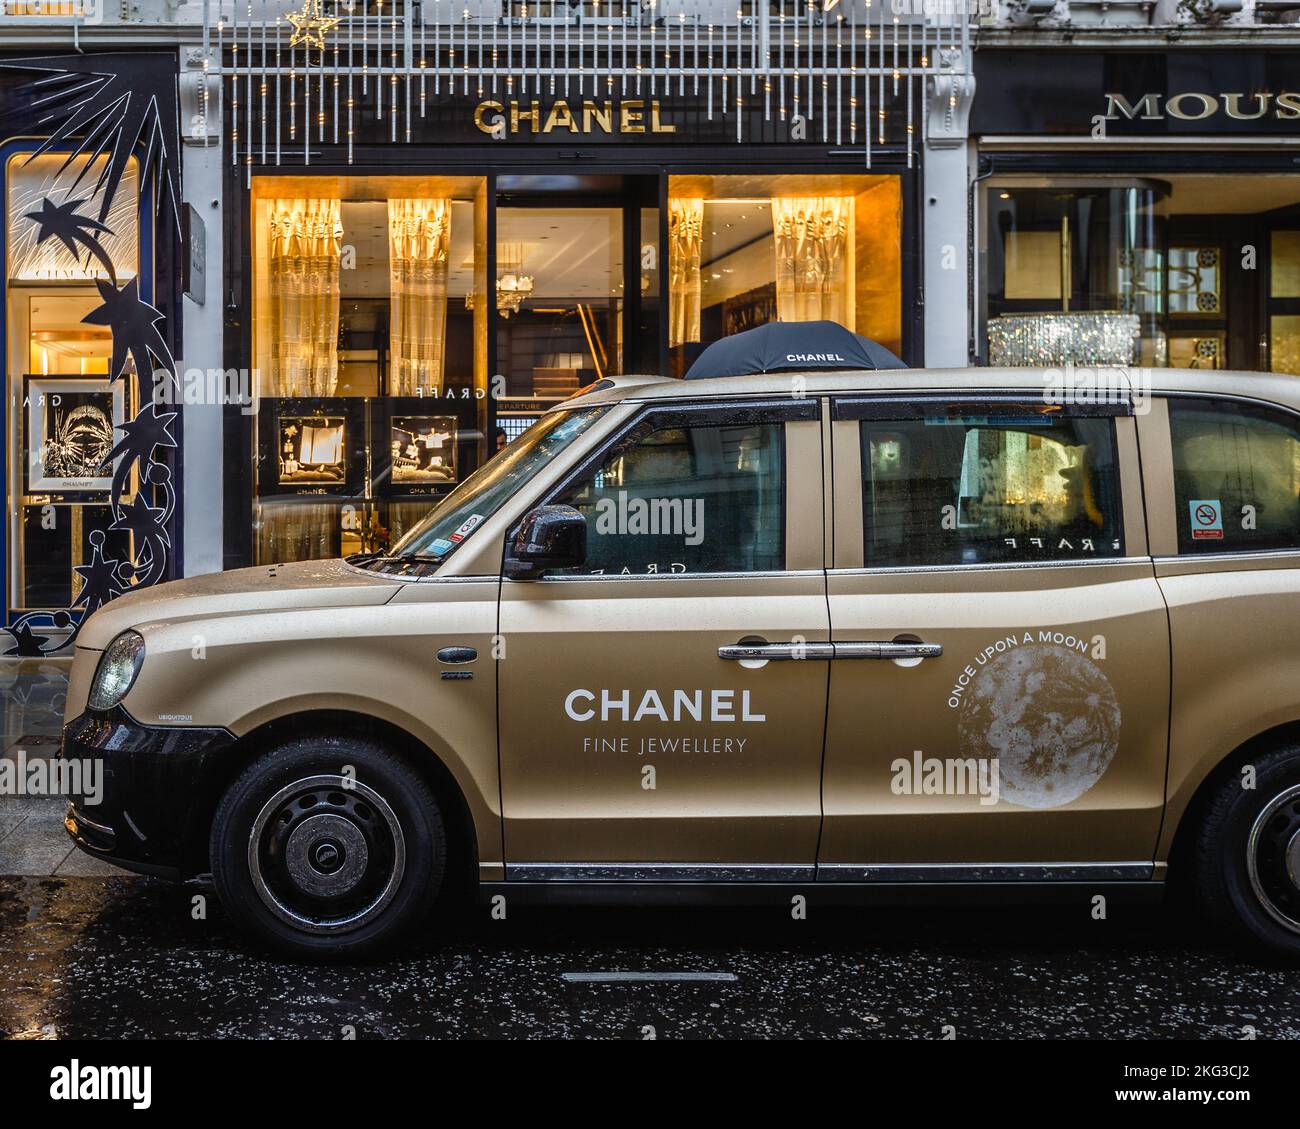 An iconic London Taxi branded with Chanel outside the Chanel Store in Mayfair, London. Stock Photo